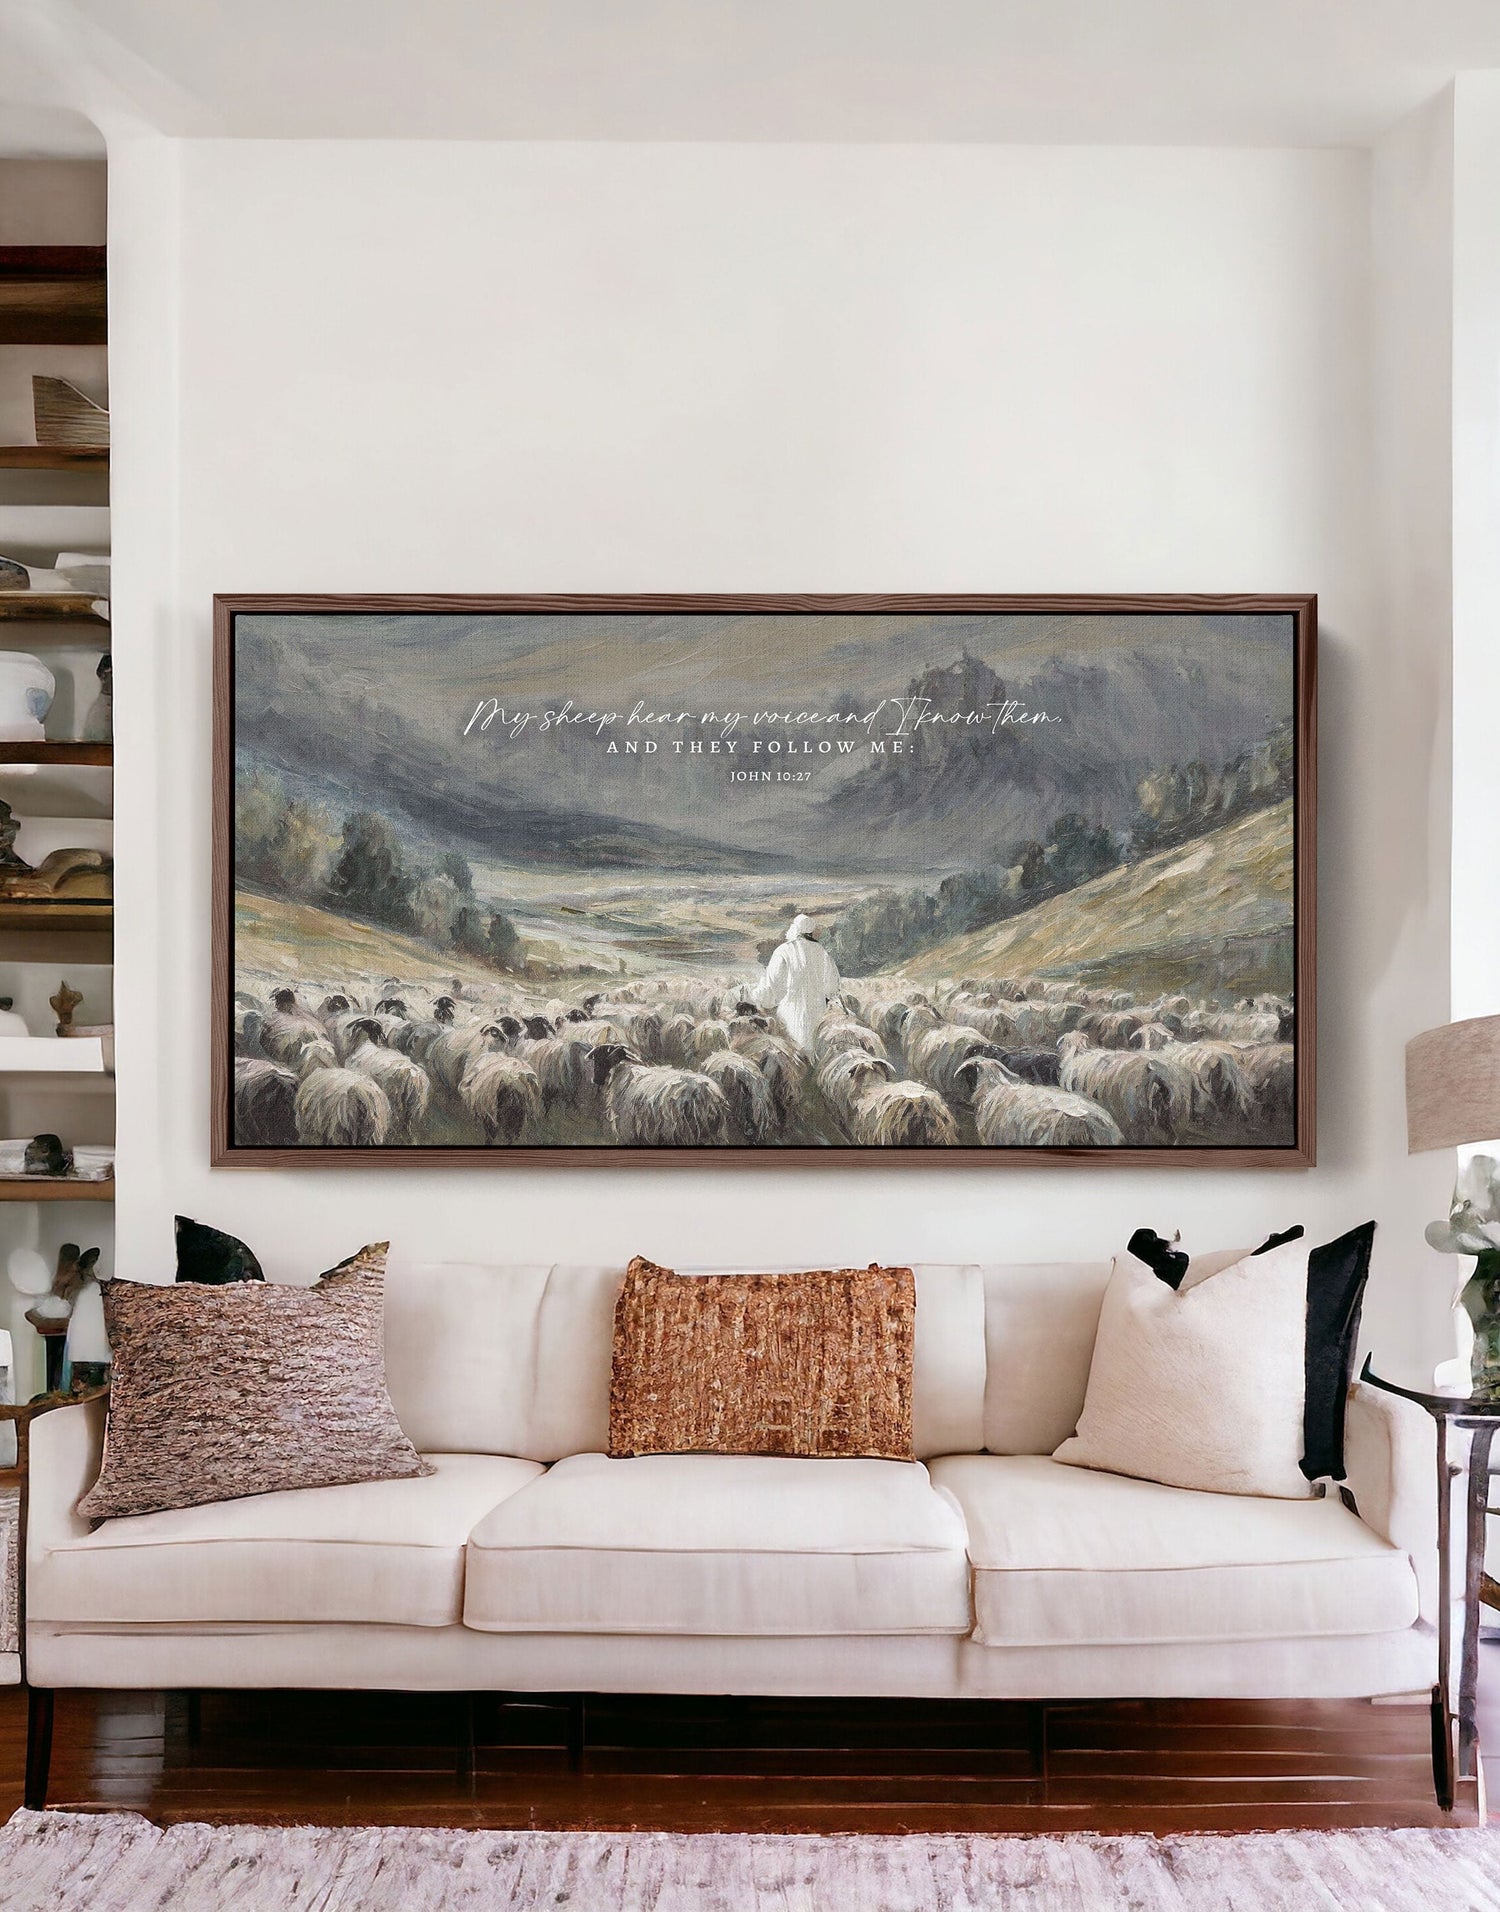 Christian Wall Art | My Sheep Know My Voice, Jesus leads the Sheep oil Painting Print on Canvas Wall Art | John 10:27 Scripture Wall Art